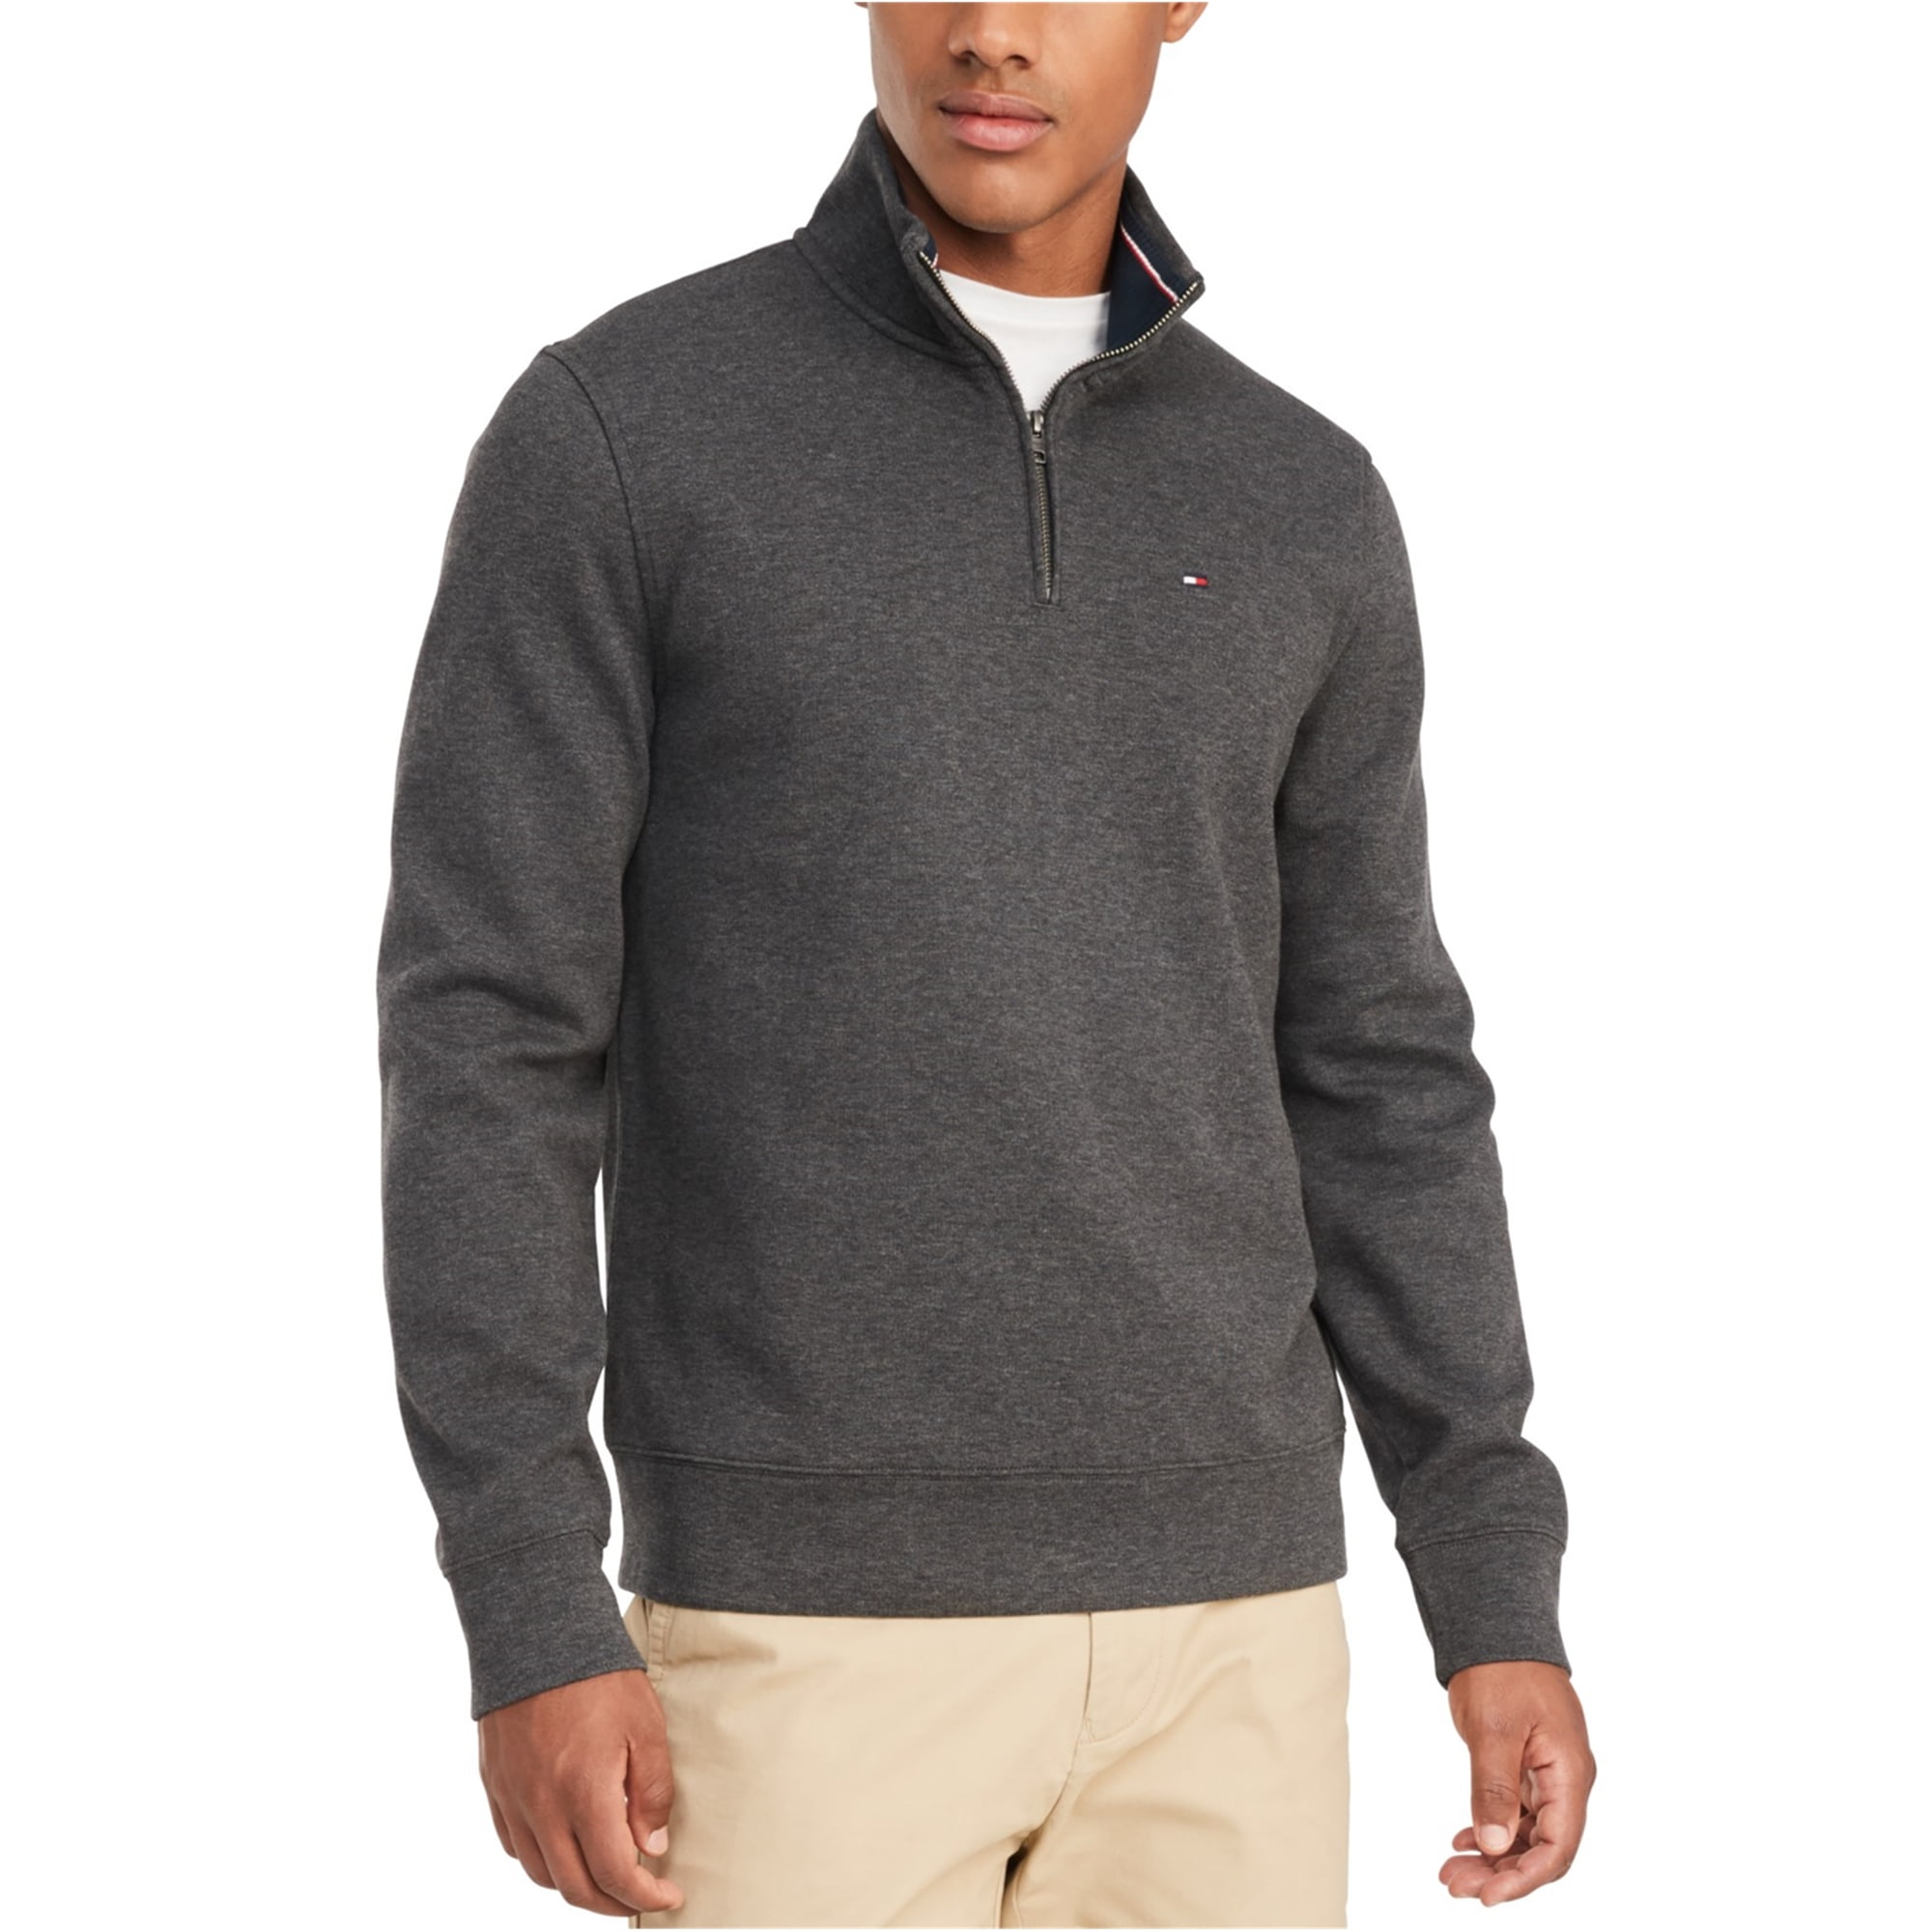 Tommy Hilfiger Mens Big and Tall Fill Zip Mock Neck Sweater